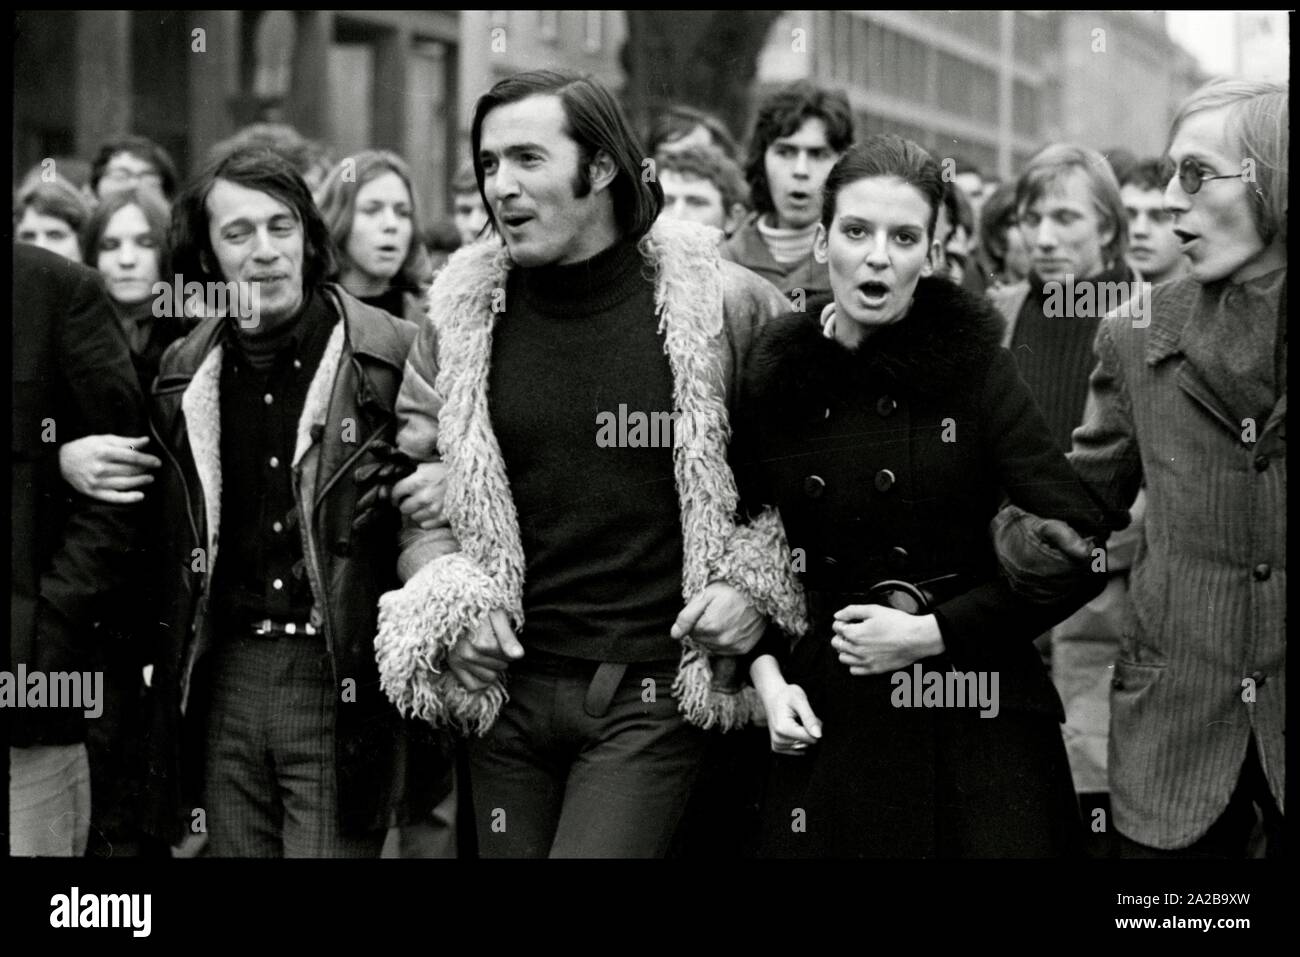 Germany. Frankfurt. 1. February 1969. Claudia Littmann - daughter of the chief of Police - rallying against the state of emergency in Spain with the Lederjacken-Fraktion. Copyright Notice: Max Scheler/SZ Photo. Stock Photo